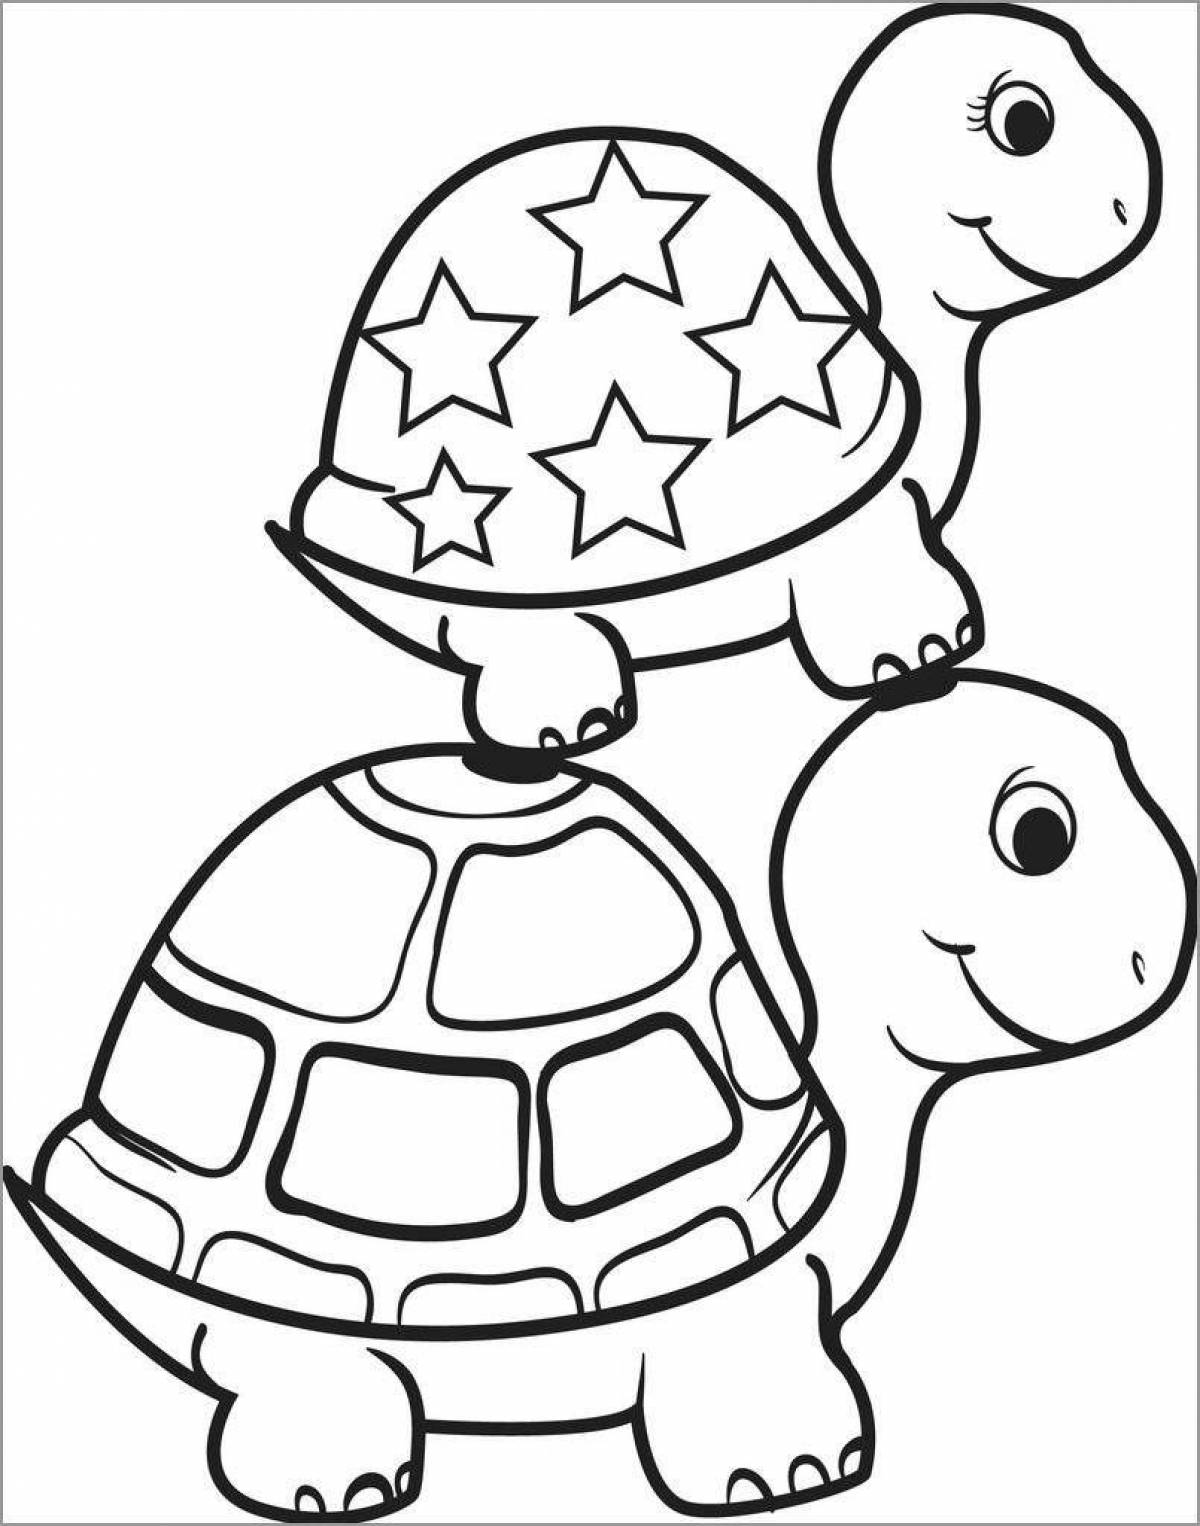 Adorable turtle coloring book for kids